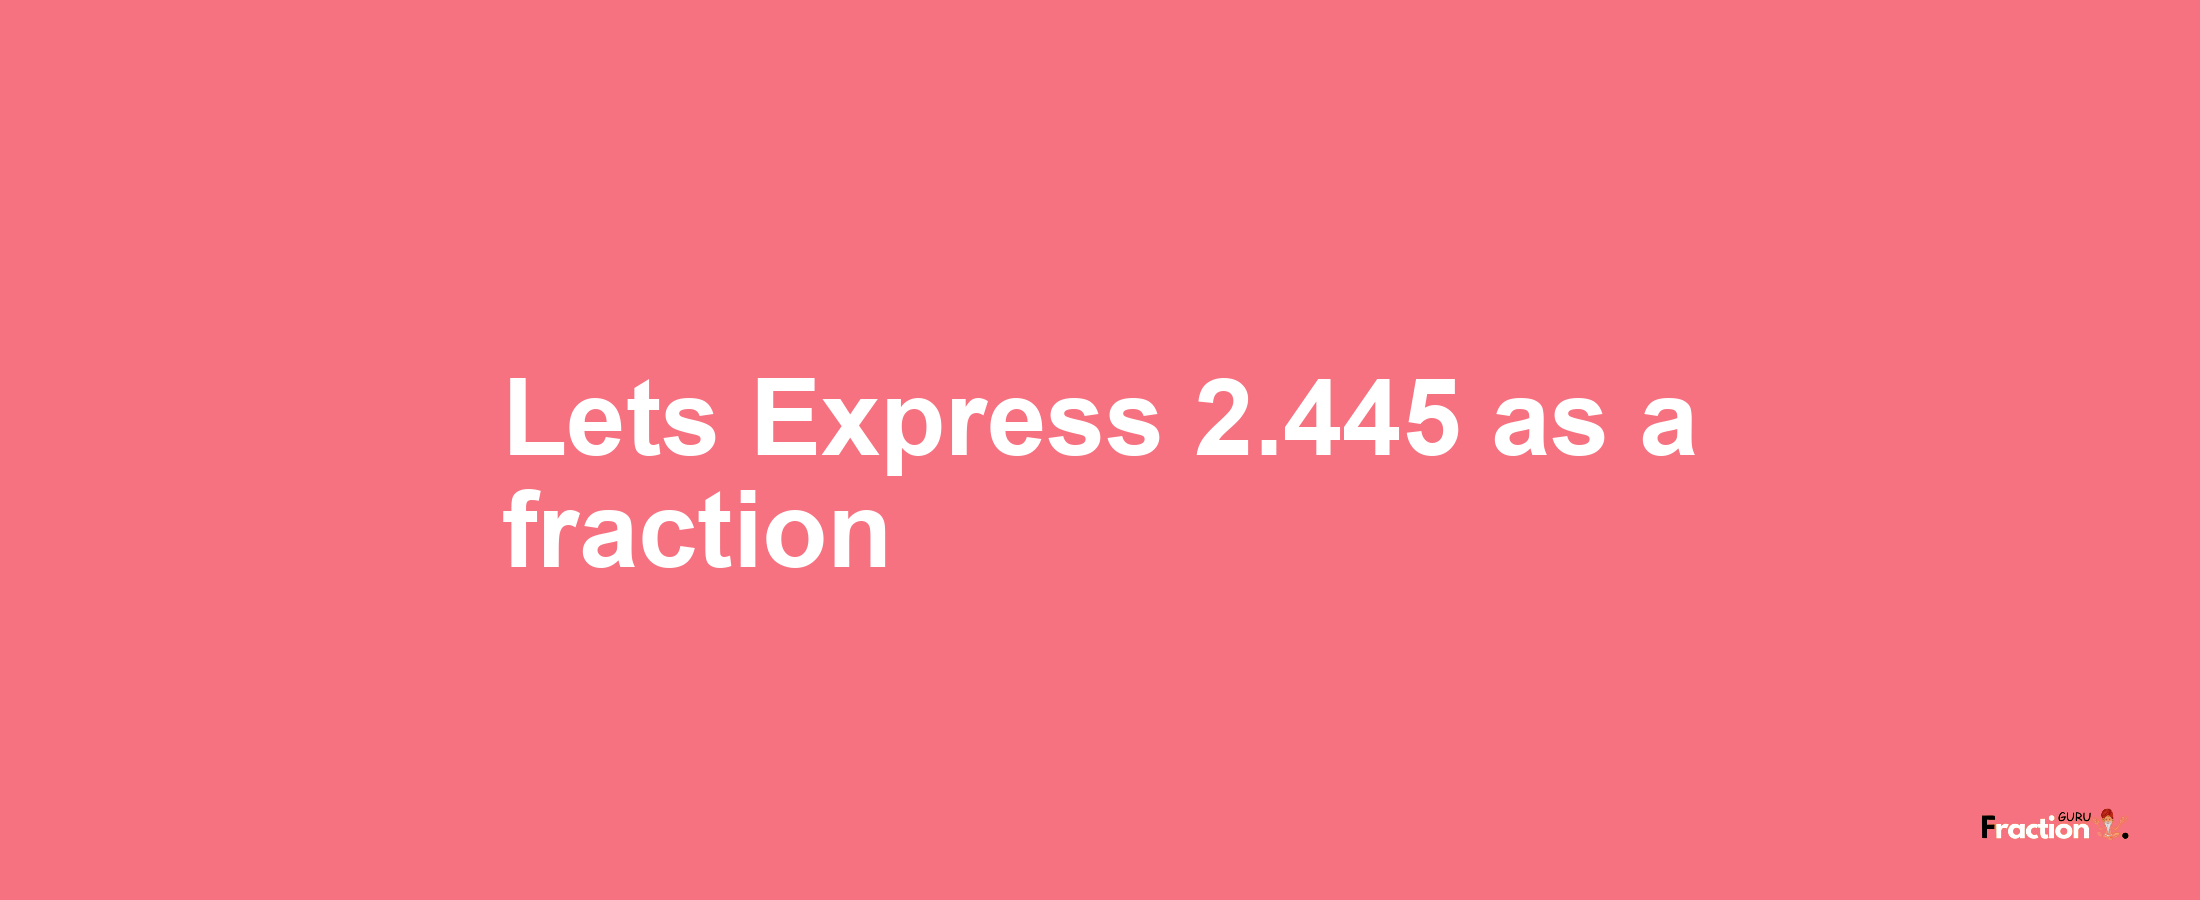 Lets Express 2.445 as afraction